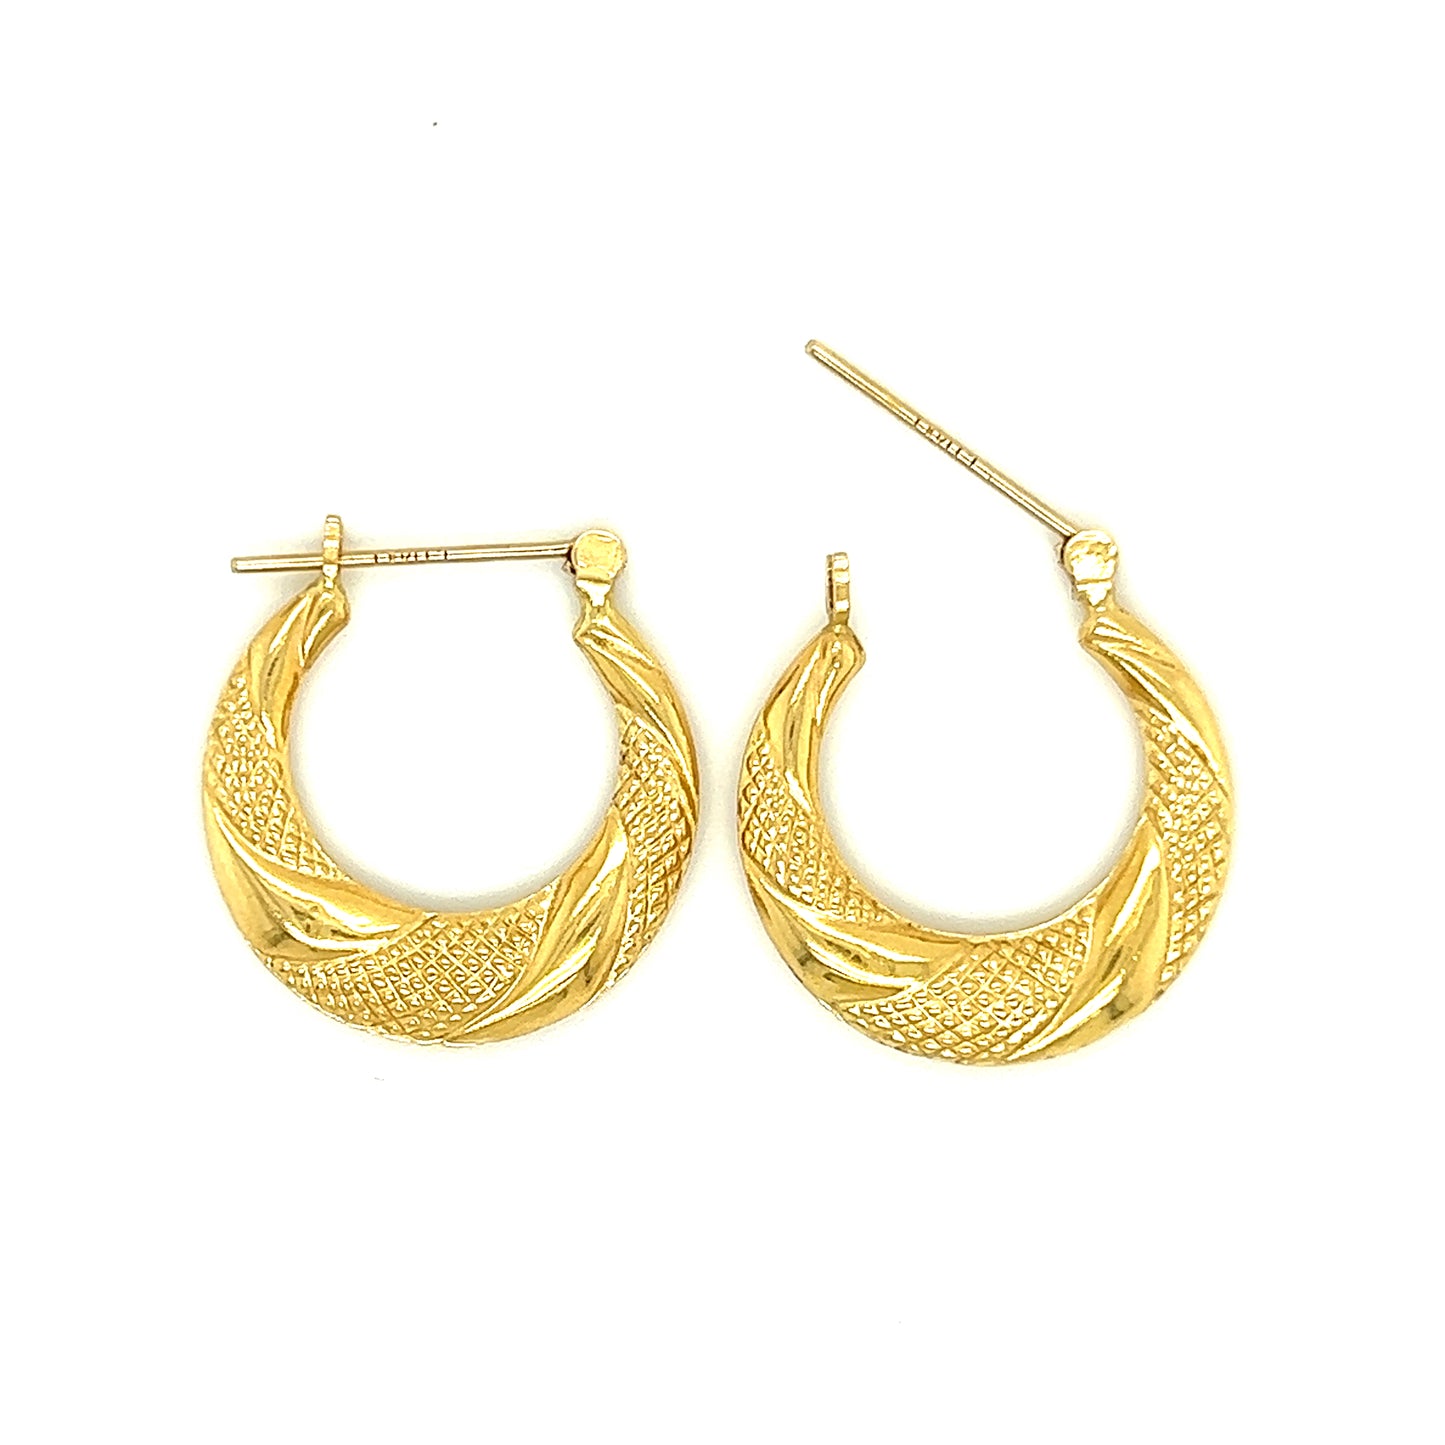 Copy of Hoop 20mm Earrings with Twisted Textured Pattern in 14K Yellow Gold Top View